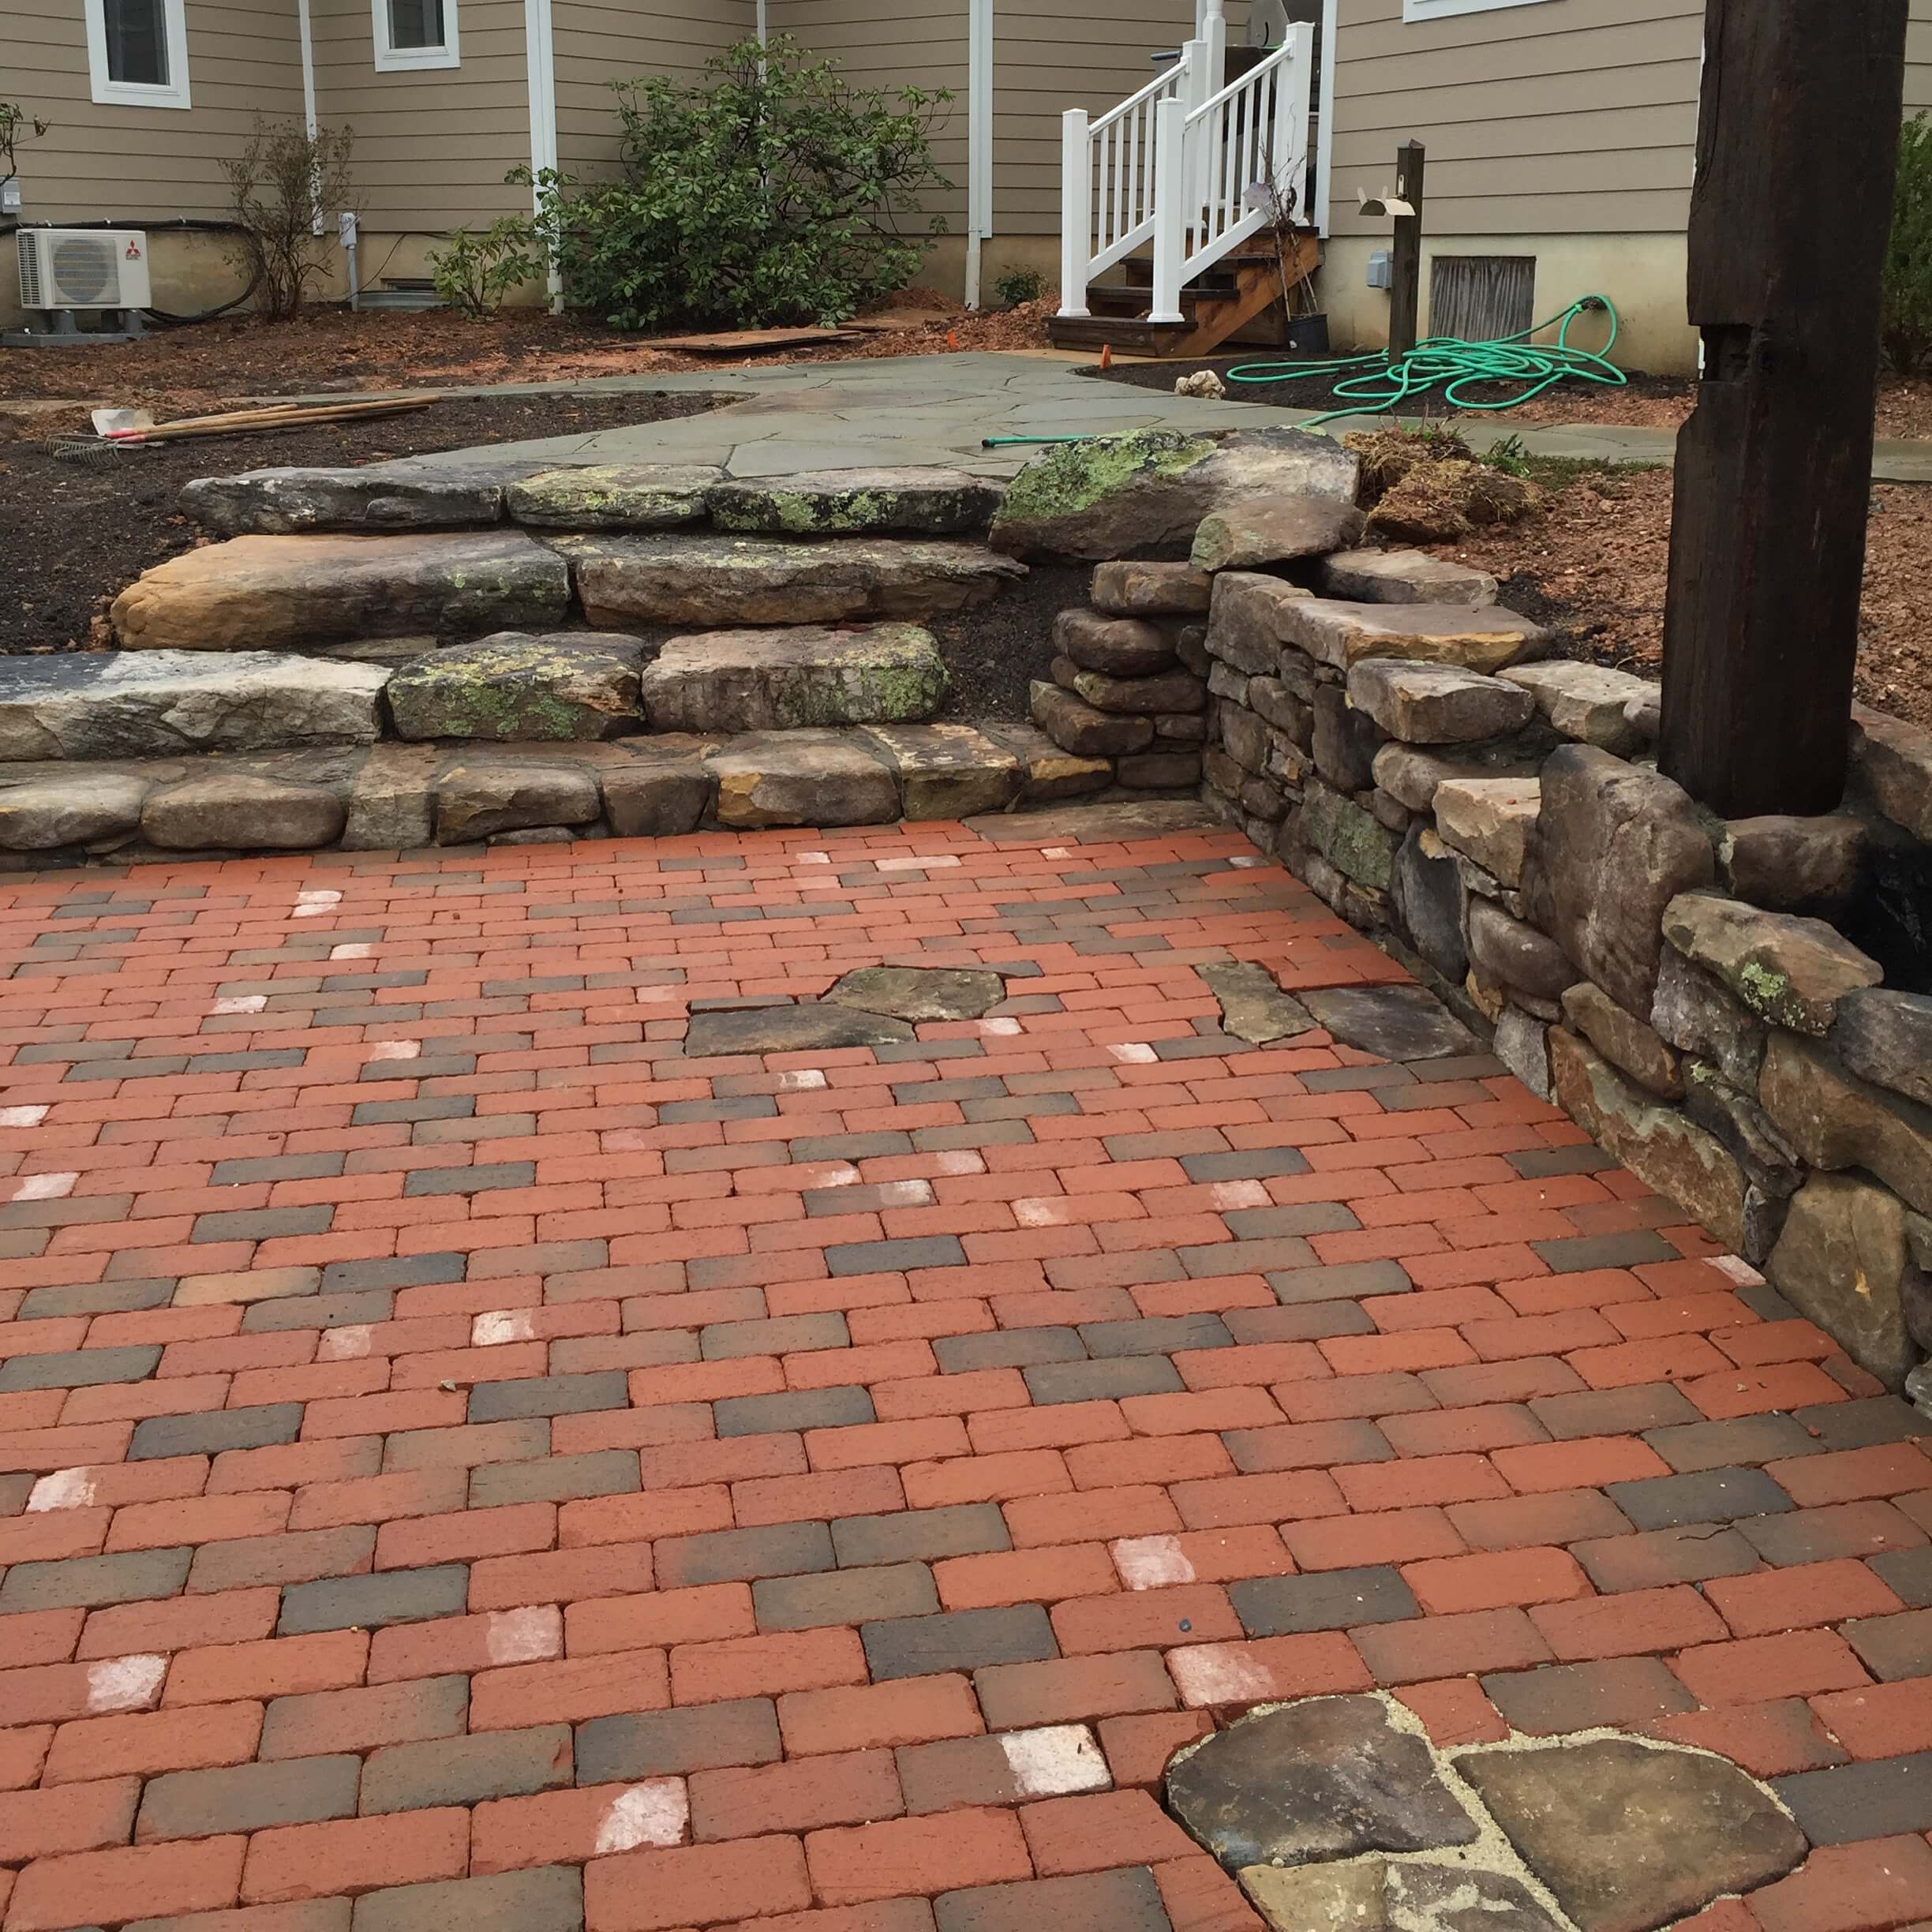 574 Rustic Brick Patio with Stone Inlay and Rustic Stone Walls